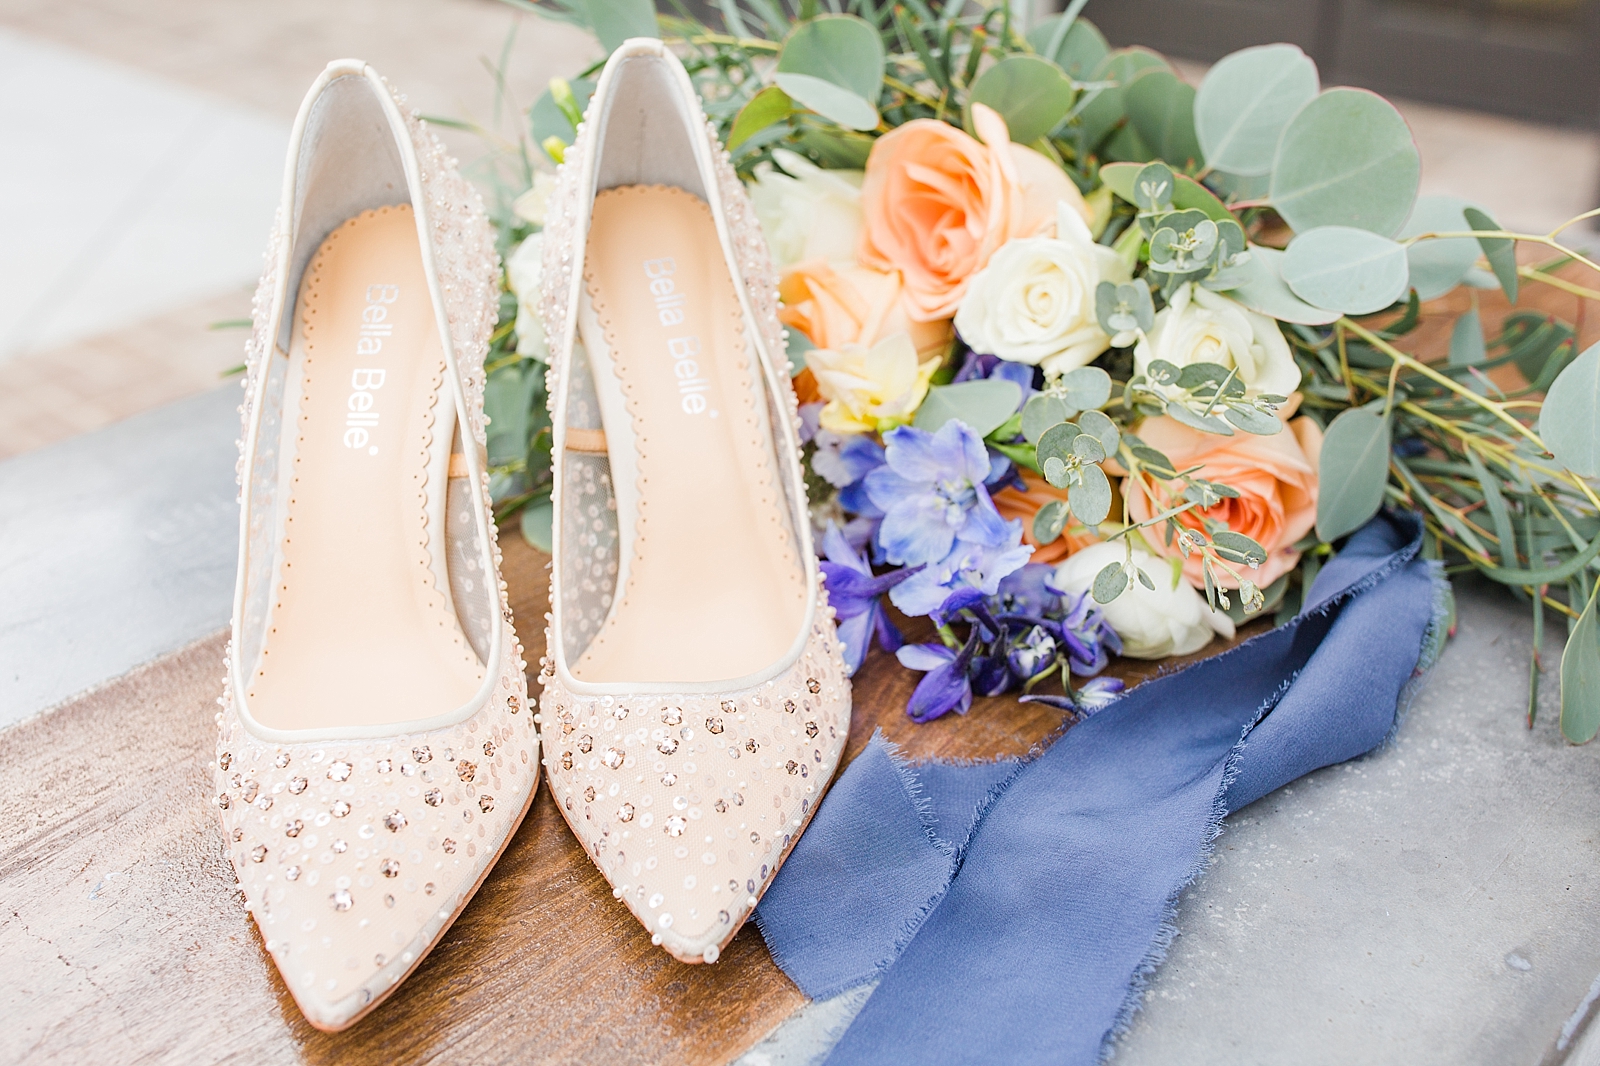 Glover Park Brewery Wedding Bridal Shoes and Bridal Bouquet Photo